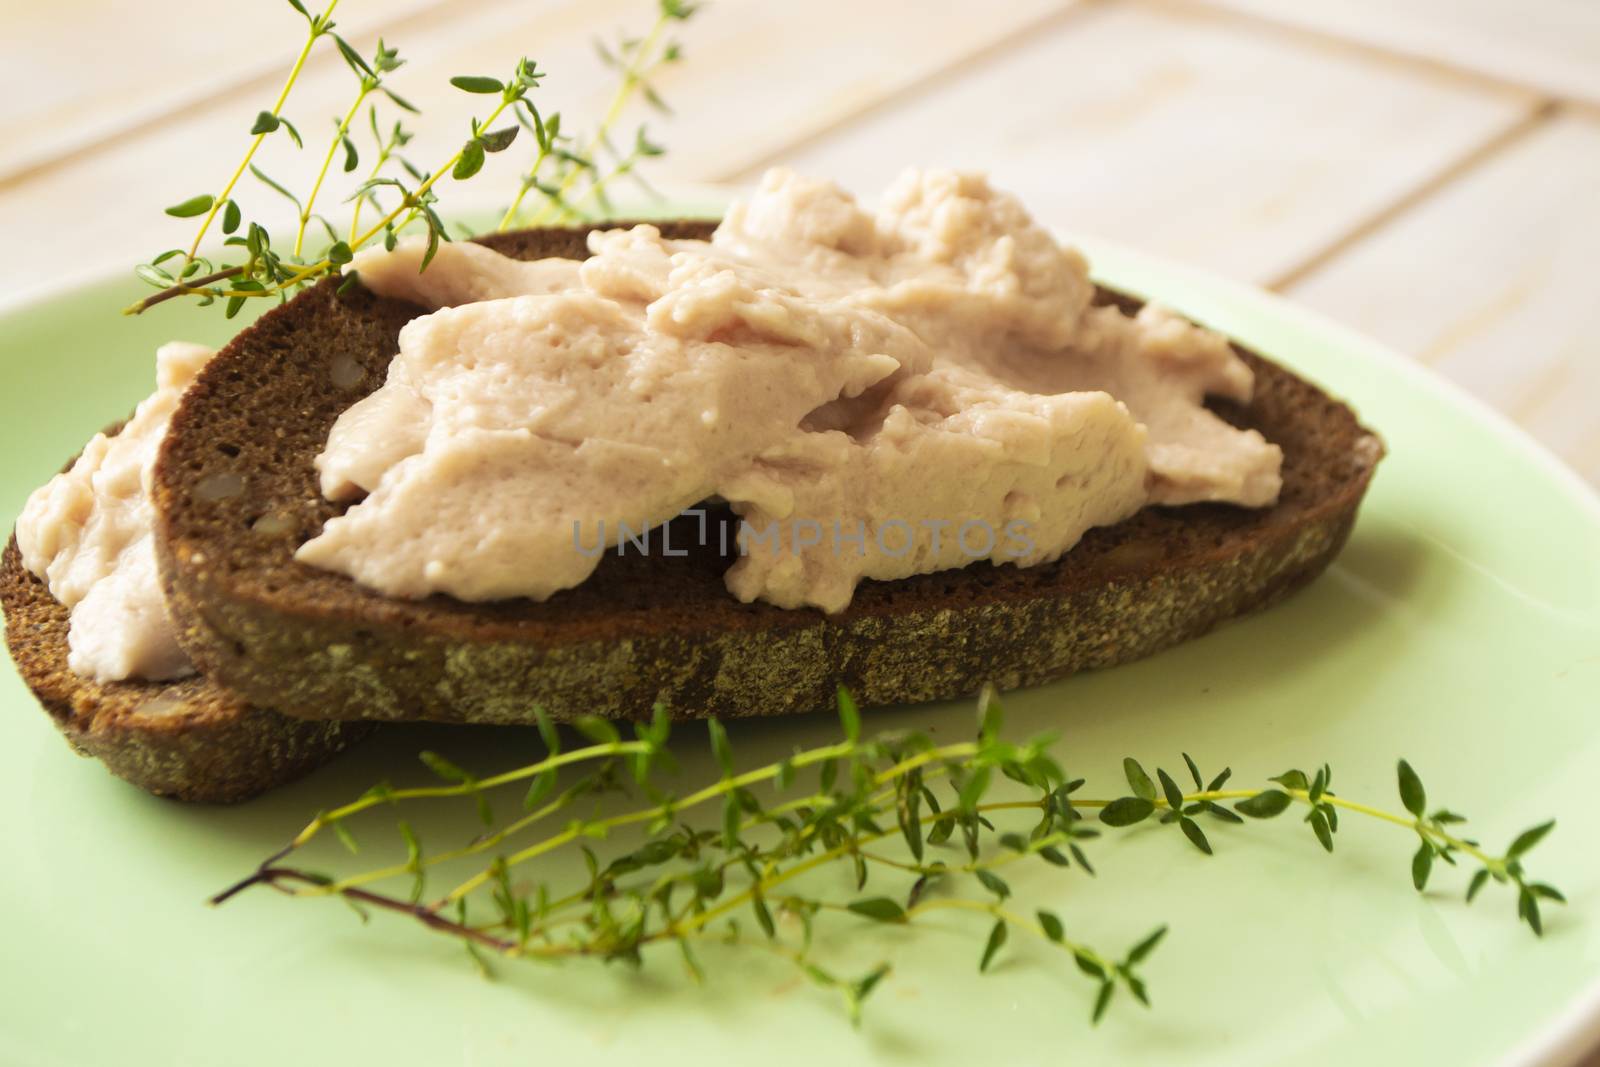 Fresh homemade chicken liver pate on bread in rustic style